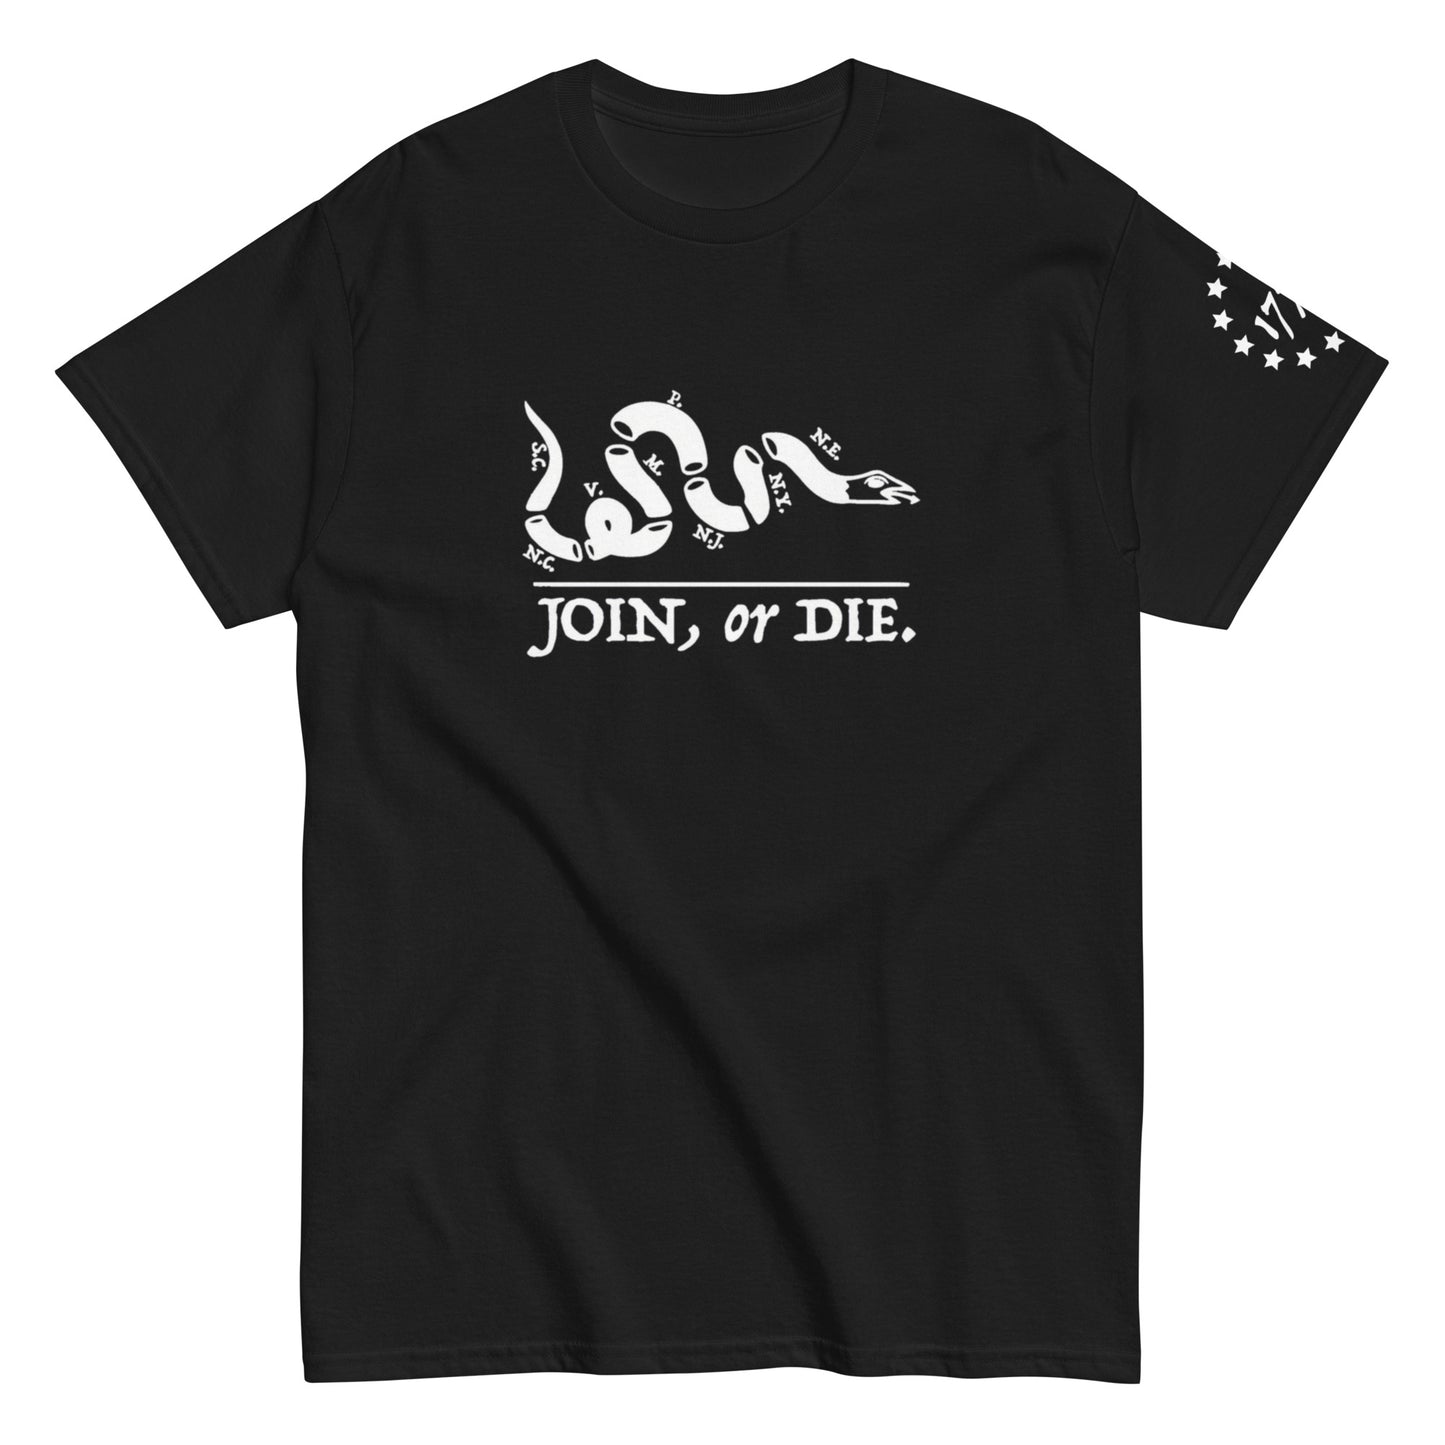 Founding Fathers "Join or Die" Revolutionary War Patriotic T-Shirt